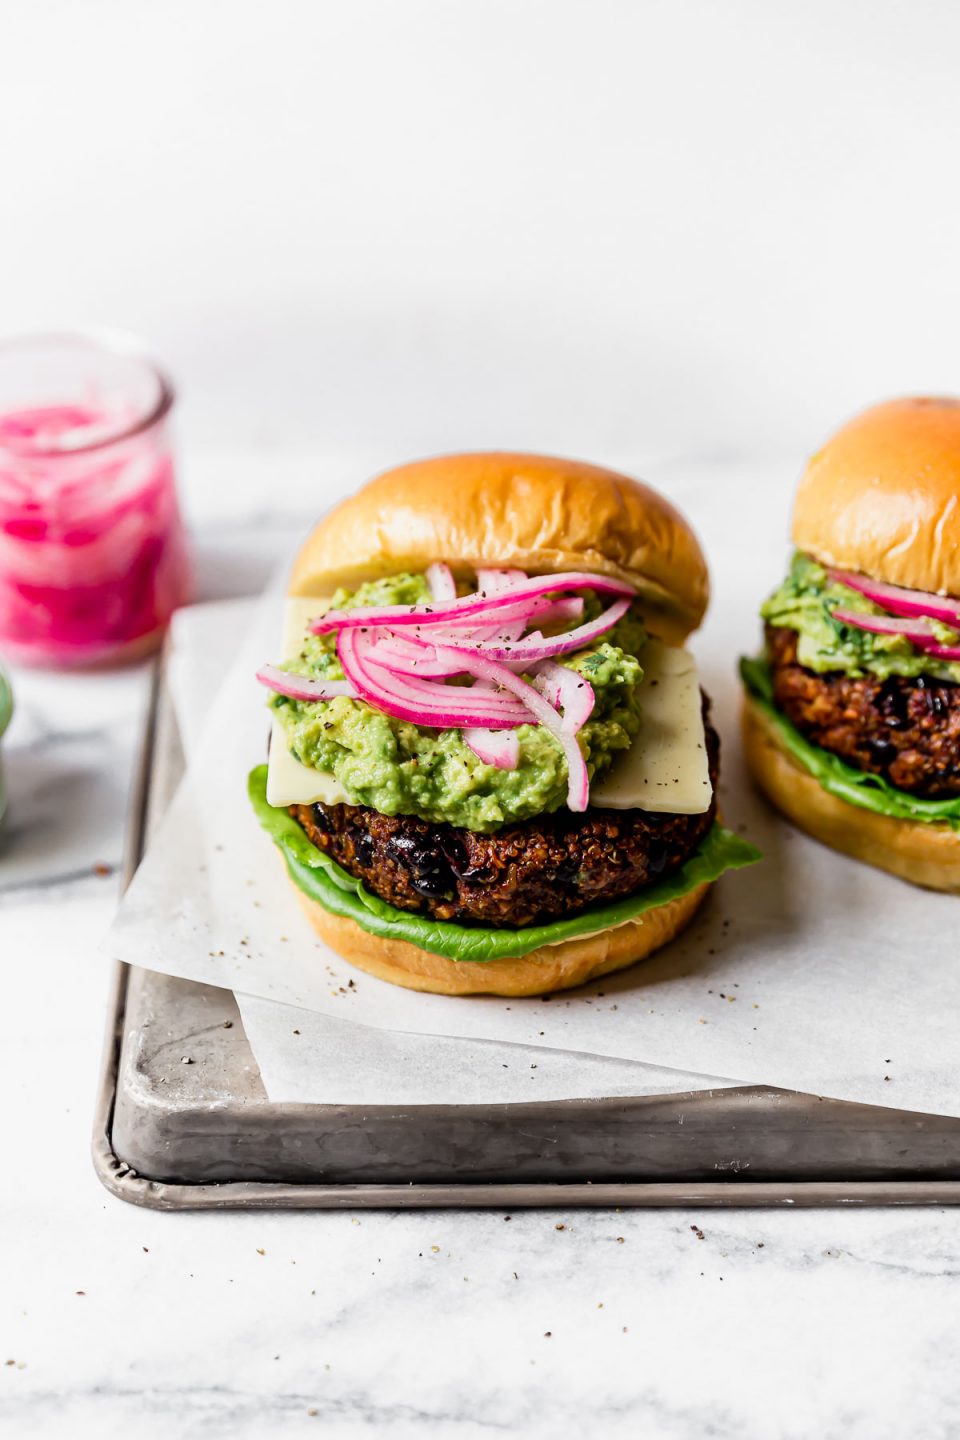 Grilled Black Bean Burgers on brioche buns, topped with lettuce, cheese, guacamole & pickled red onion. The burgers are placed on a small metal tray, with jars of guacamole & pickled red onions in the background.